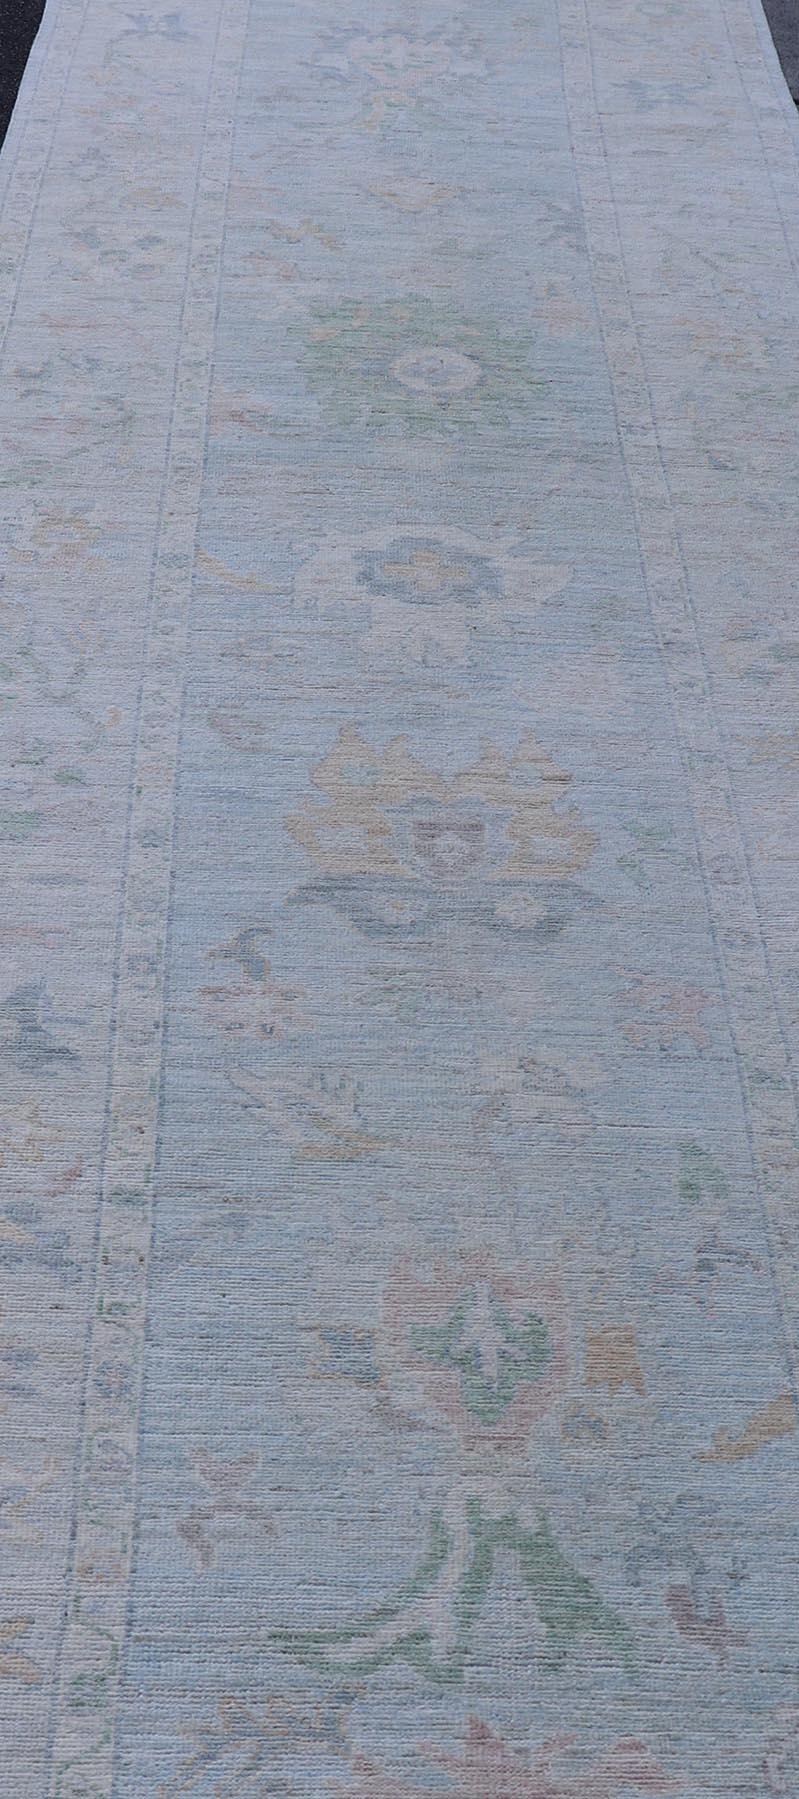 Neutral Color Gallery Oushak Runner with Medallion Design in Light Blue Field. Keivan Woven Arts; rug AWR-17798 Country of Origin: Afghanistan Type: Oushak Design: Medallion, Motif, Floral Motif. 
Measures: 4'2 x 18'2 
This modern piece holds